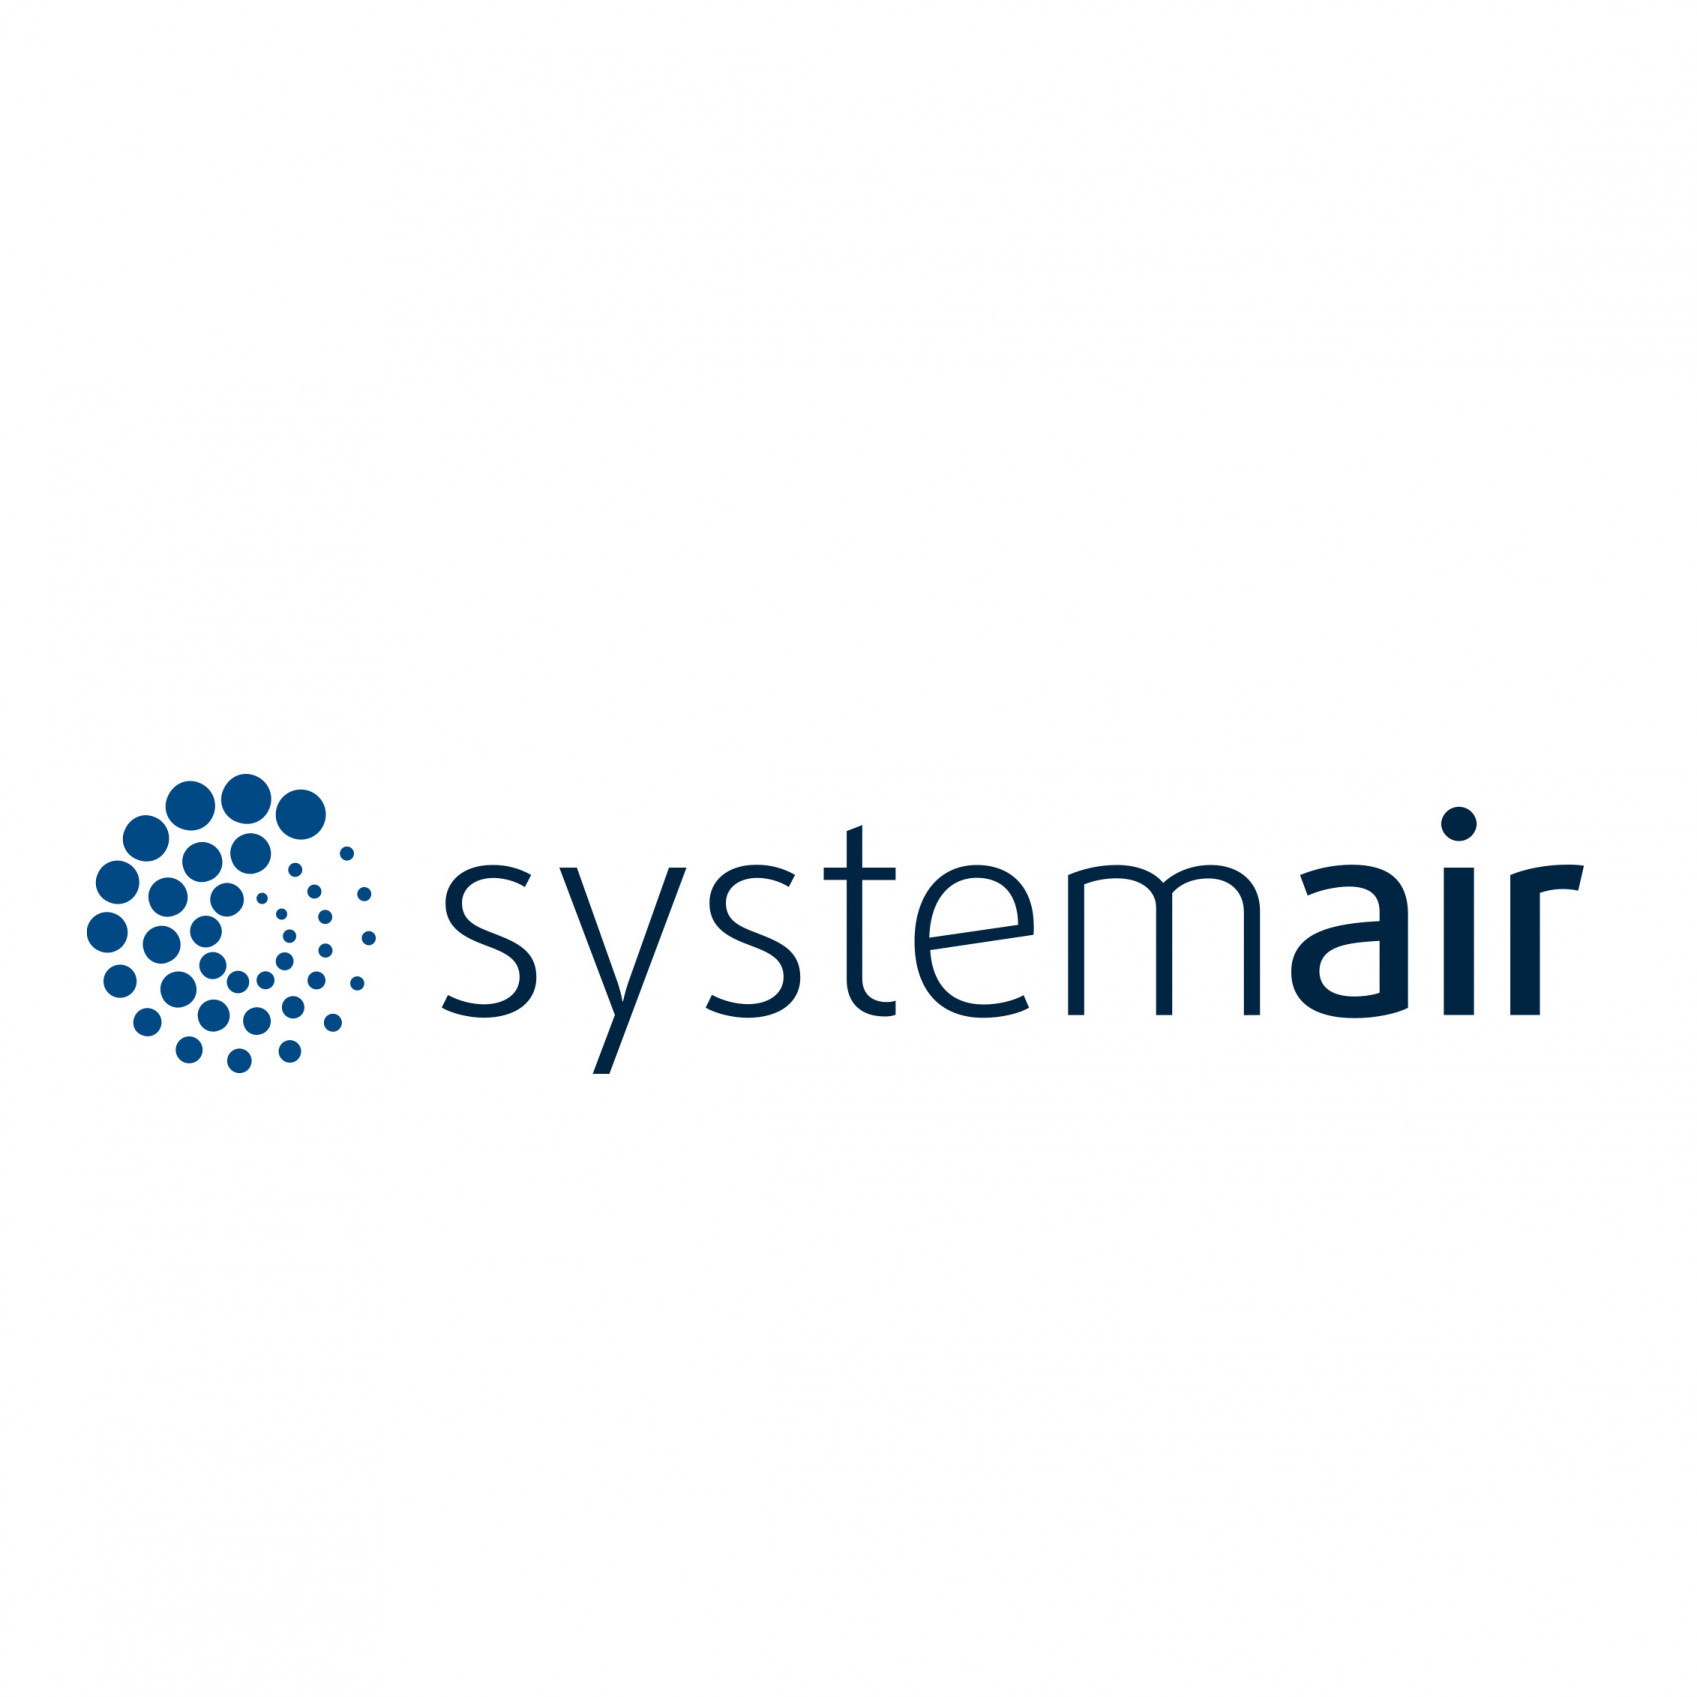 SYSTEMAIR AS - Sustainable, energy-saving HVAC products and solutions ❄️☀️